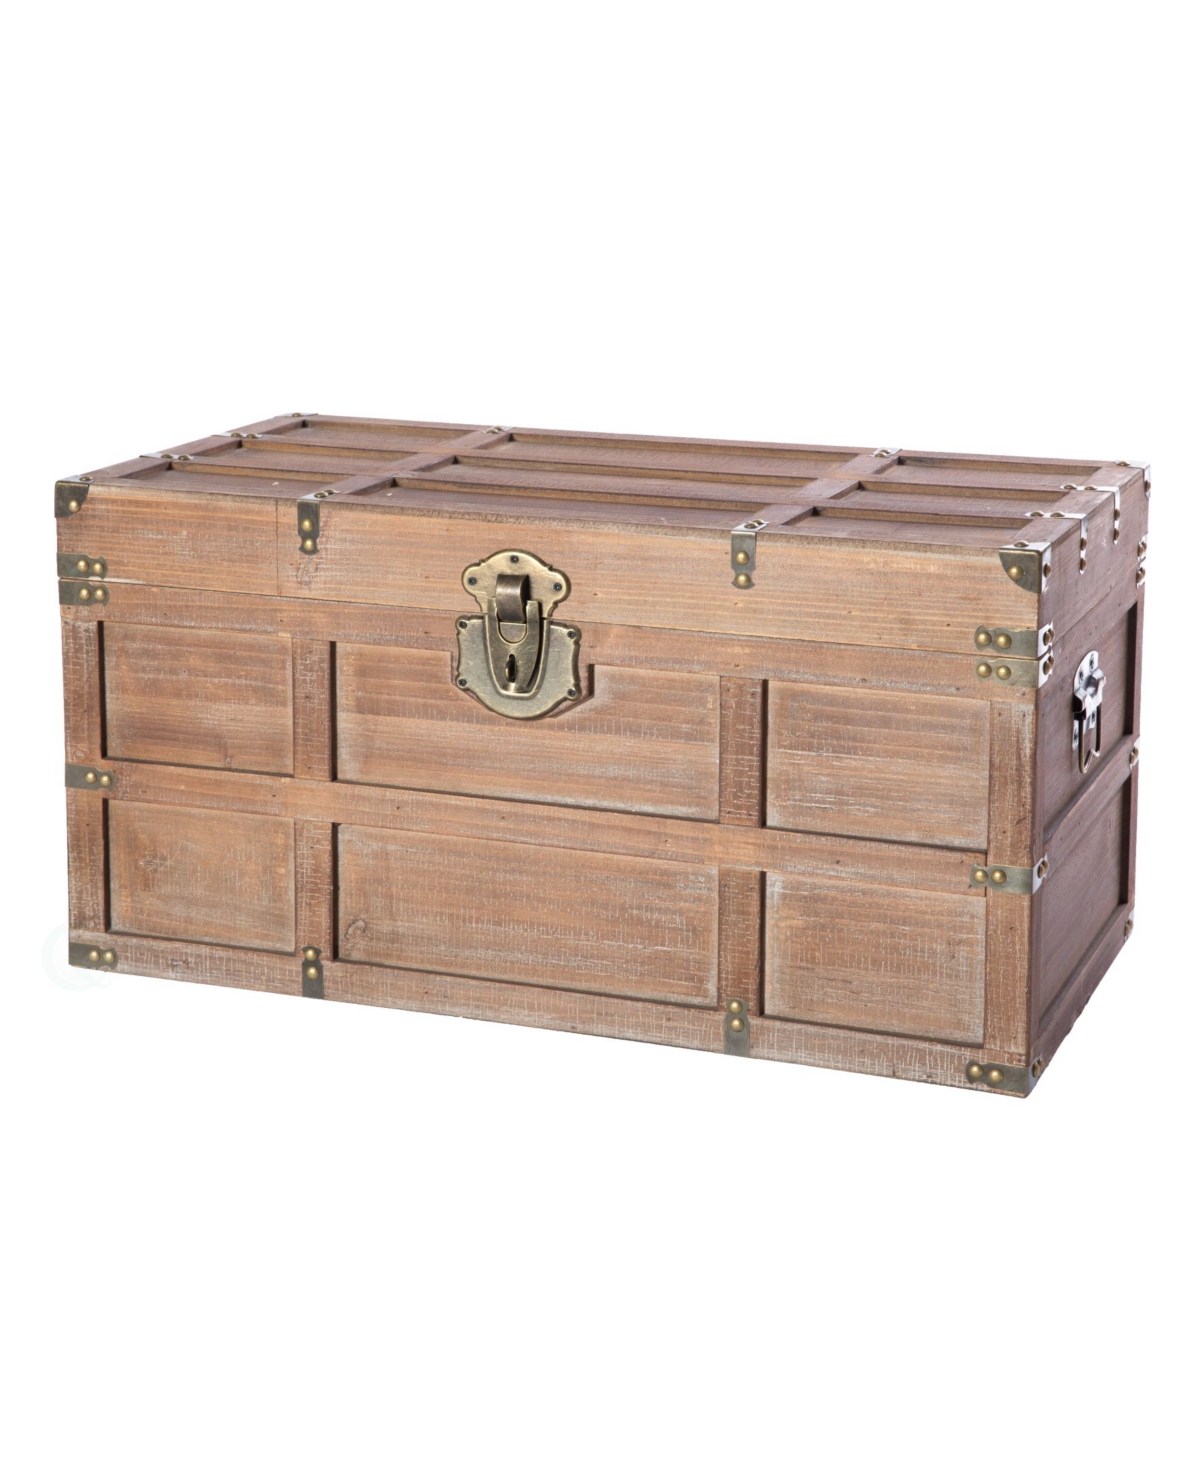 Wooden Rectangular Lined Rustic Storage Trunk with Latch, Medium - Brown